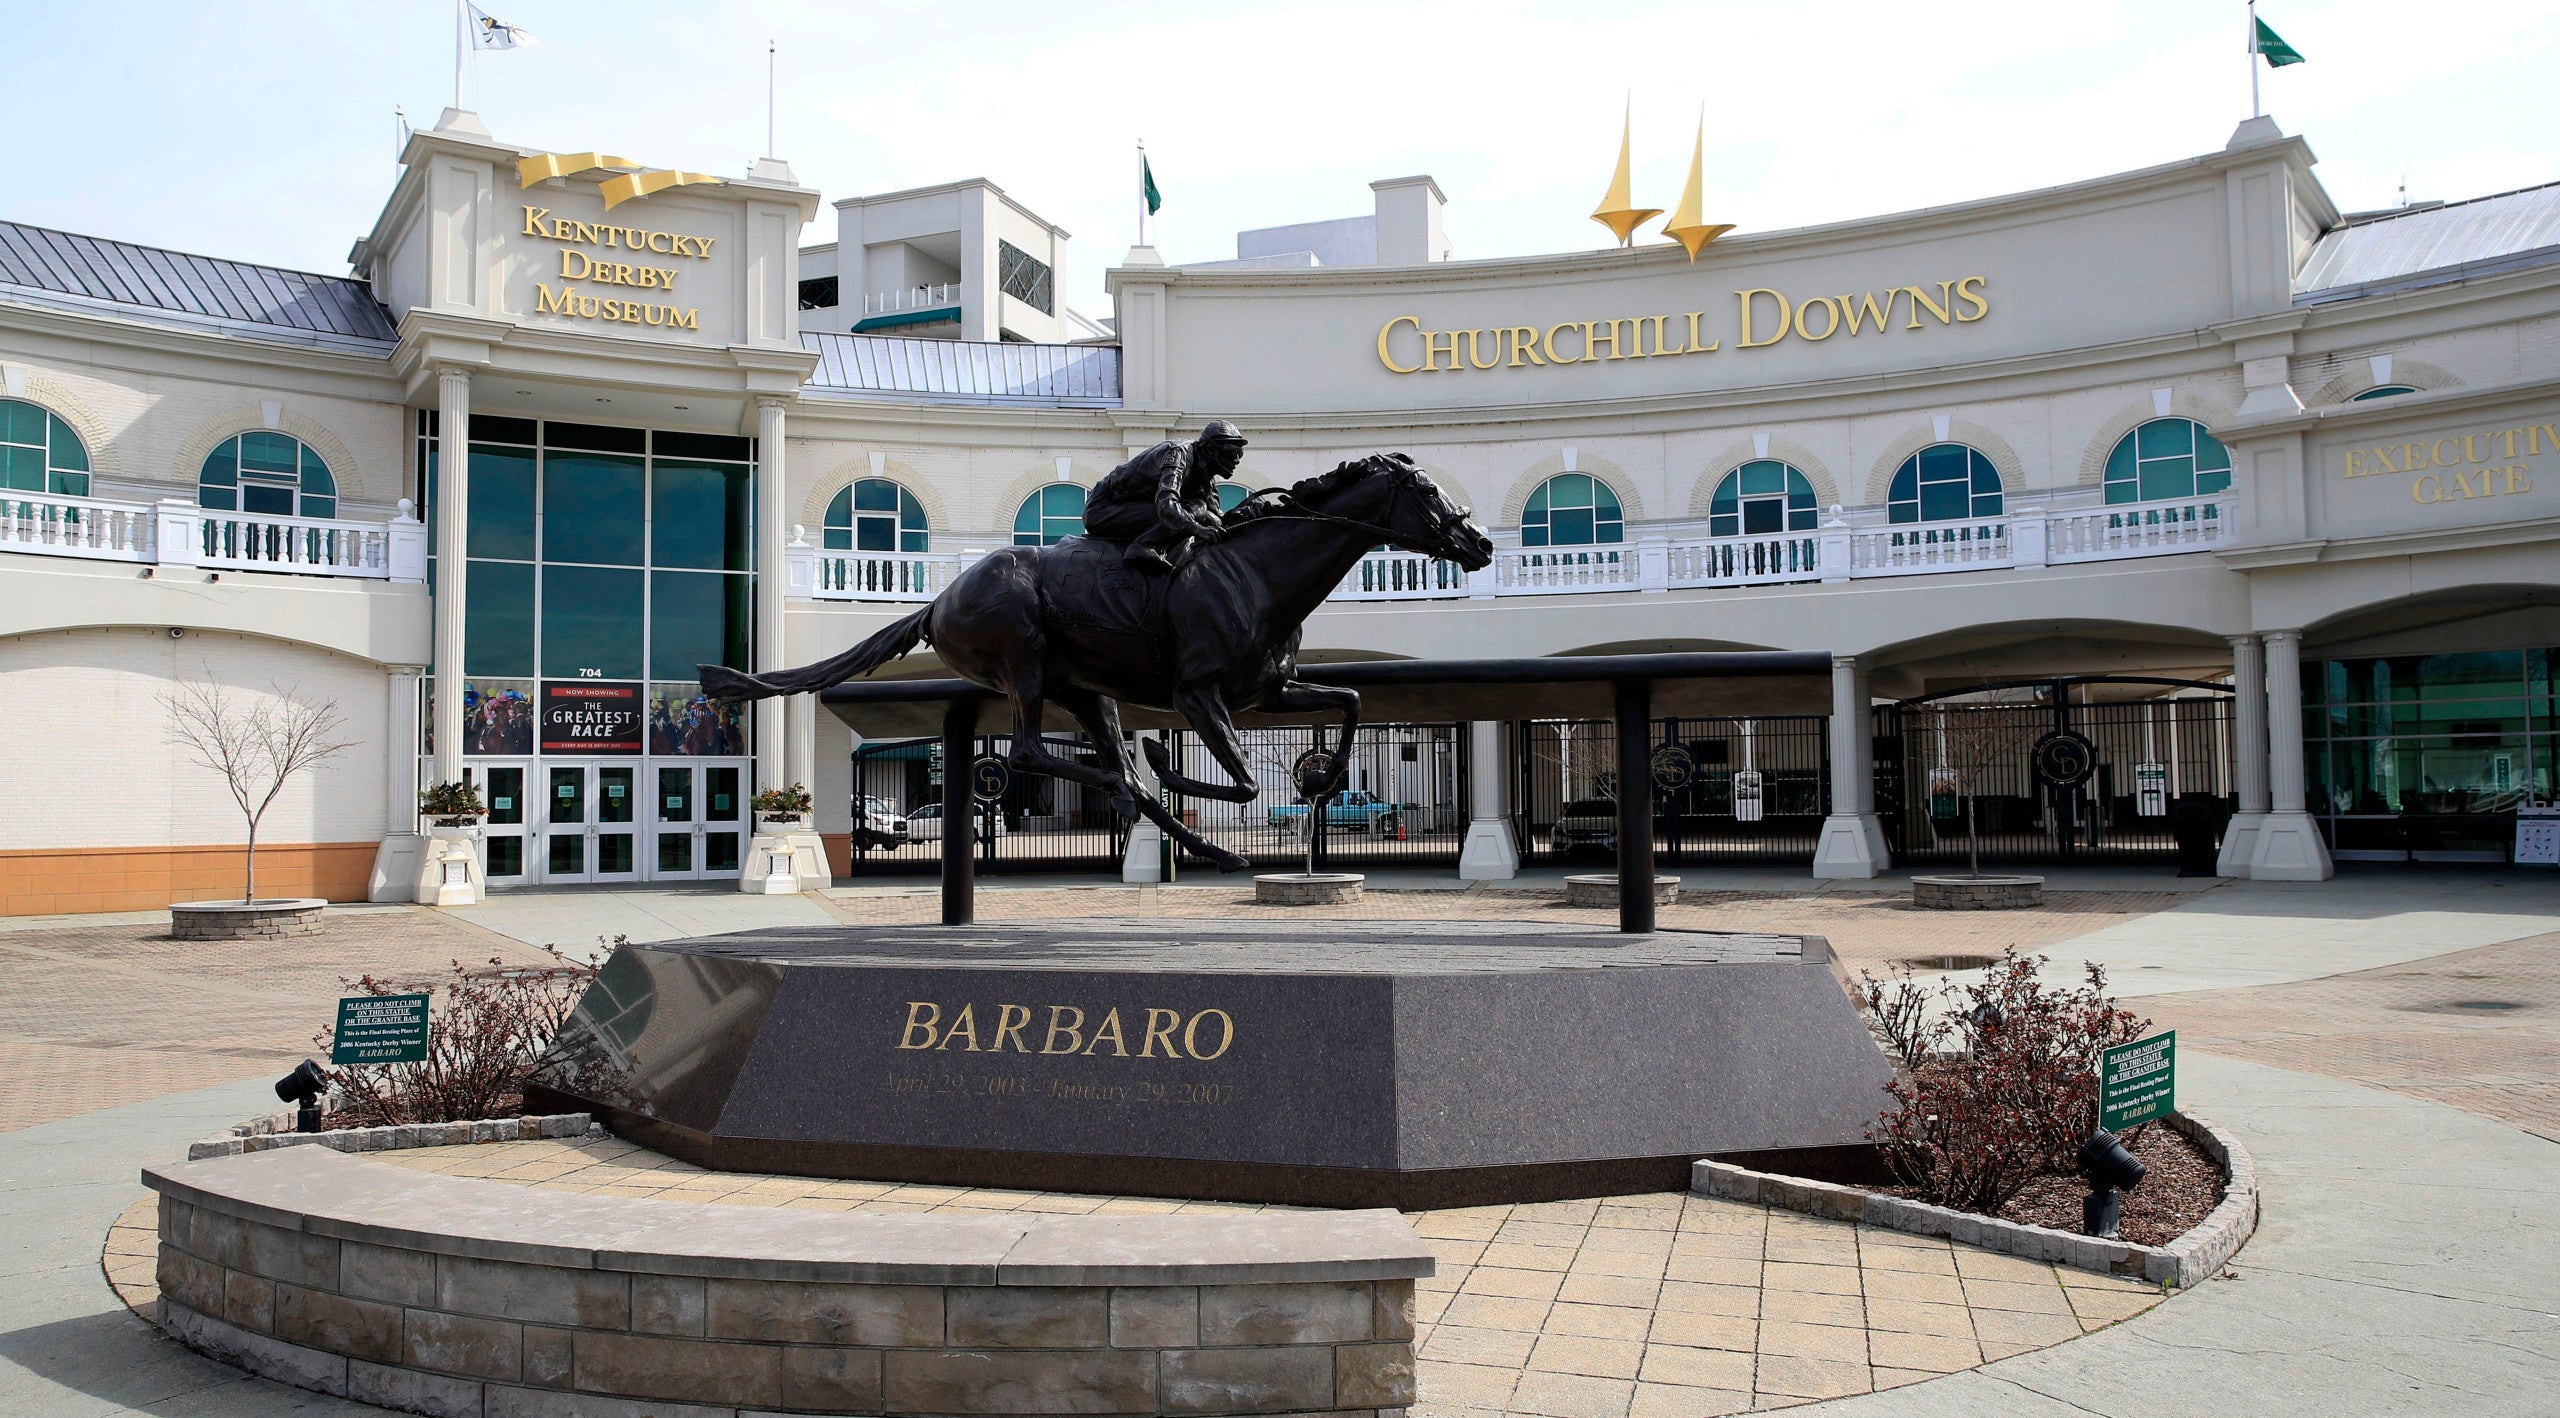 does churchill downs do tours